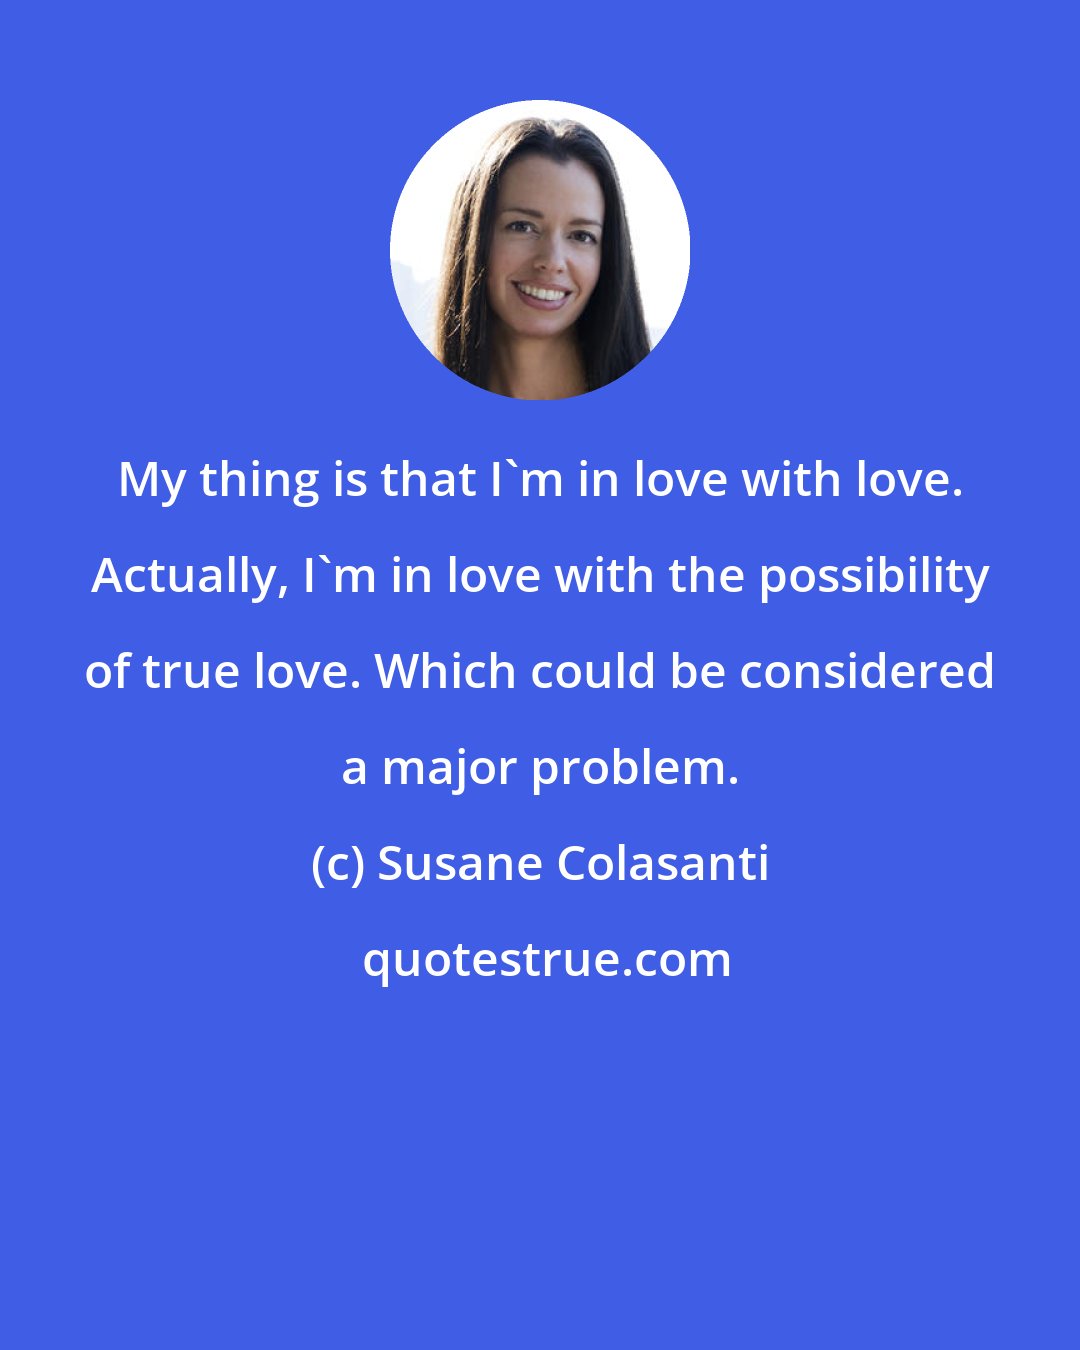 Susane Colasanti: My thing is that I'm in love with love. Actually, I'm in love with the possibility of true love. Which could be considered a major problem.